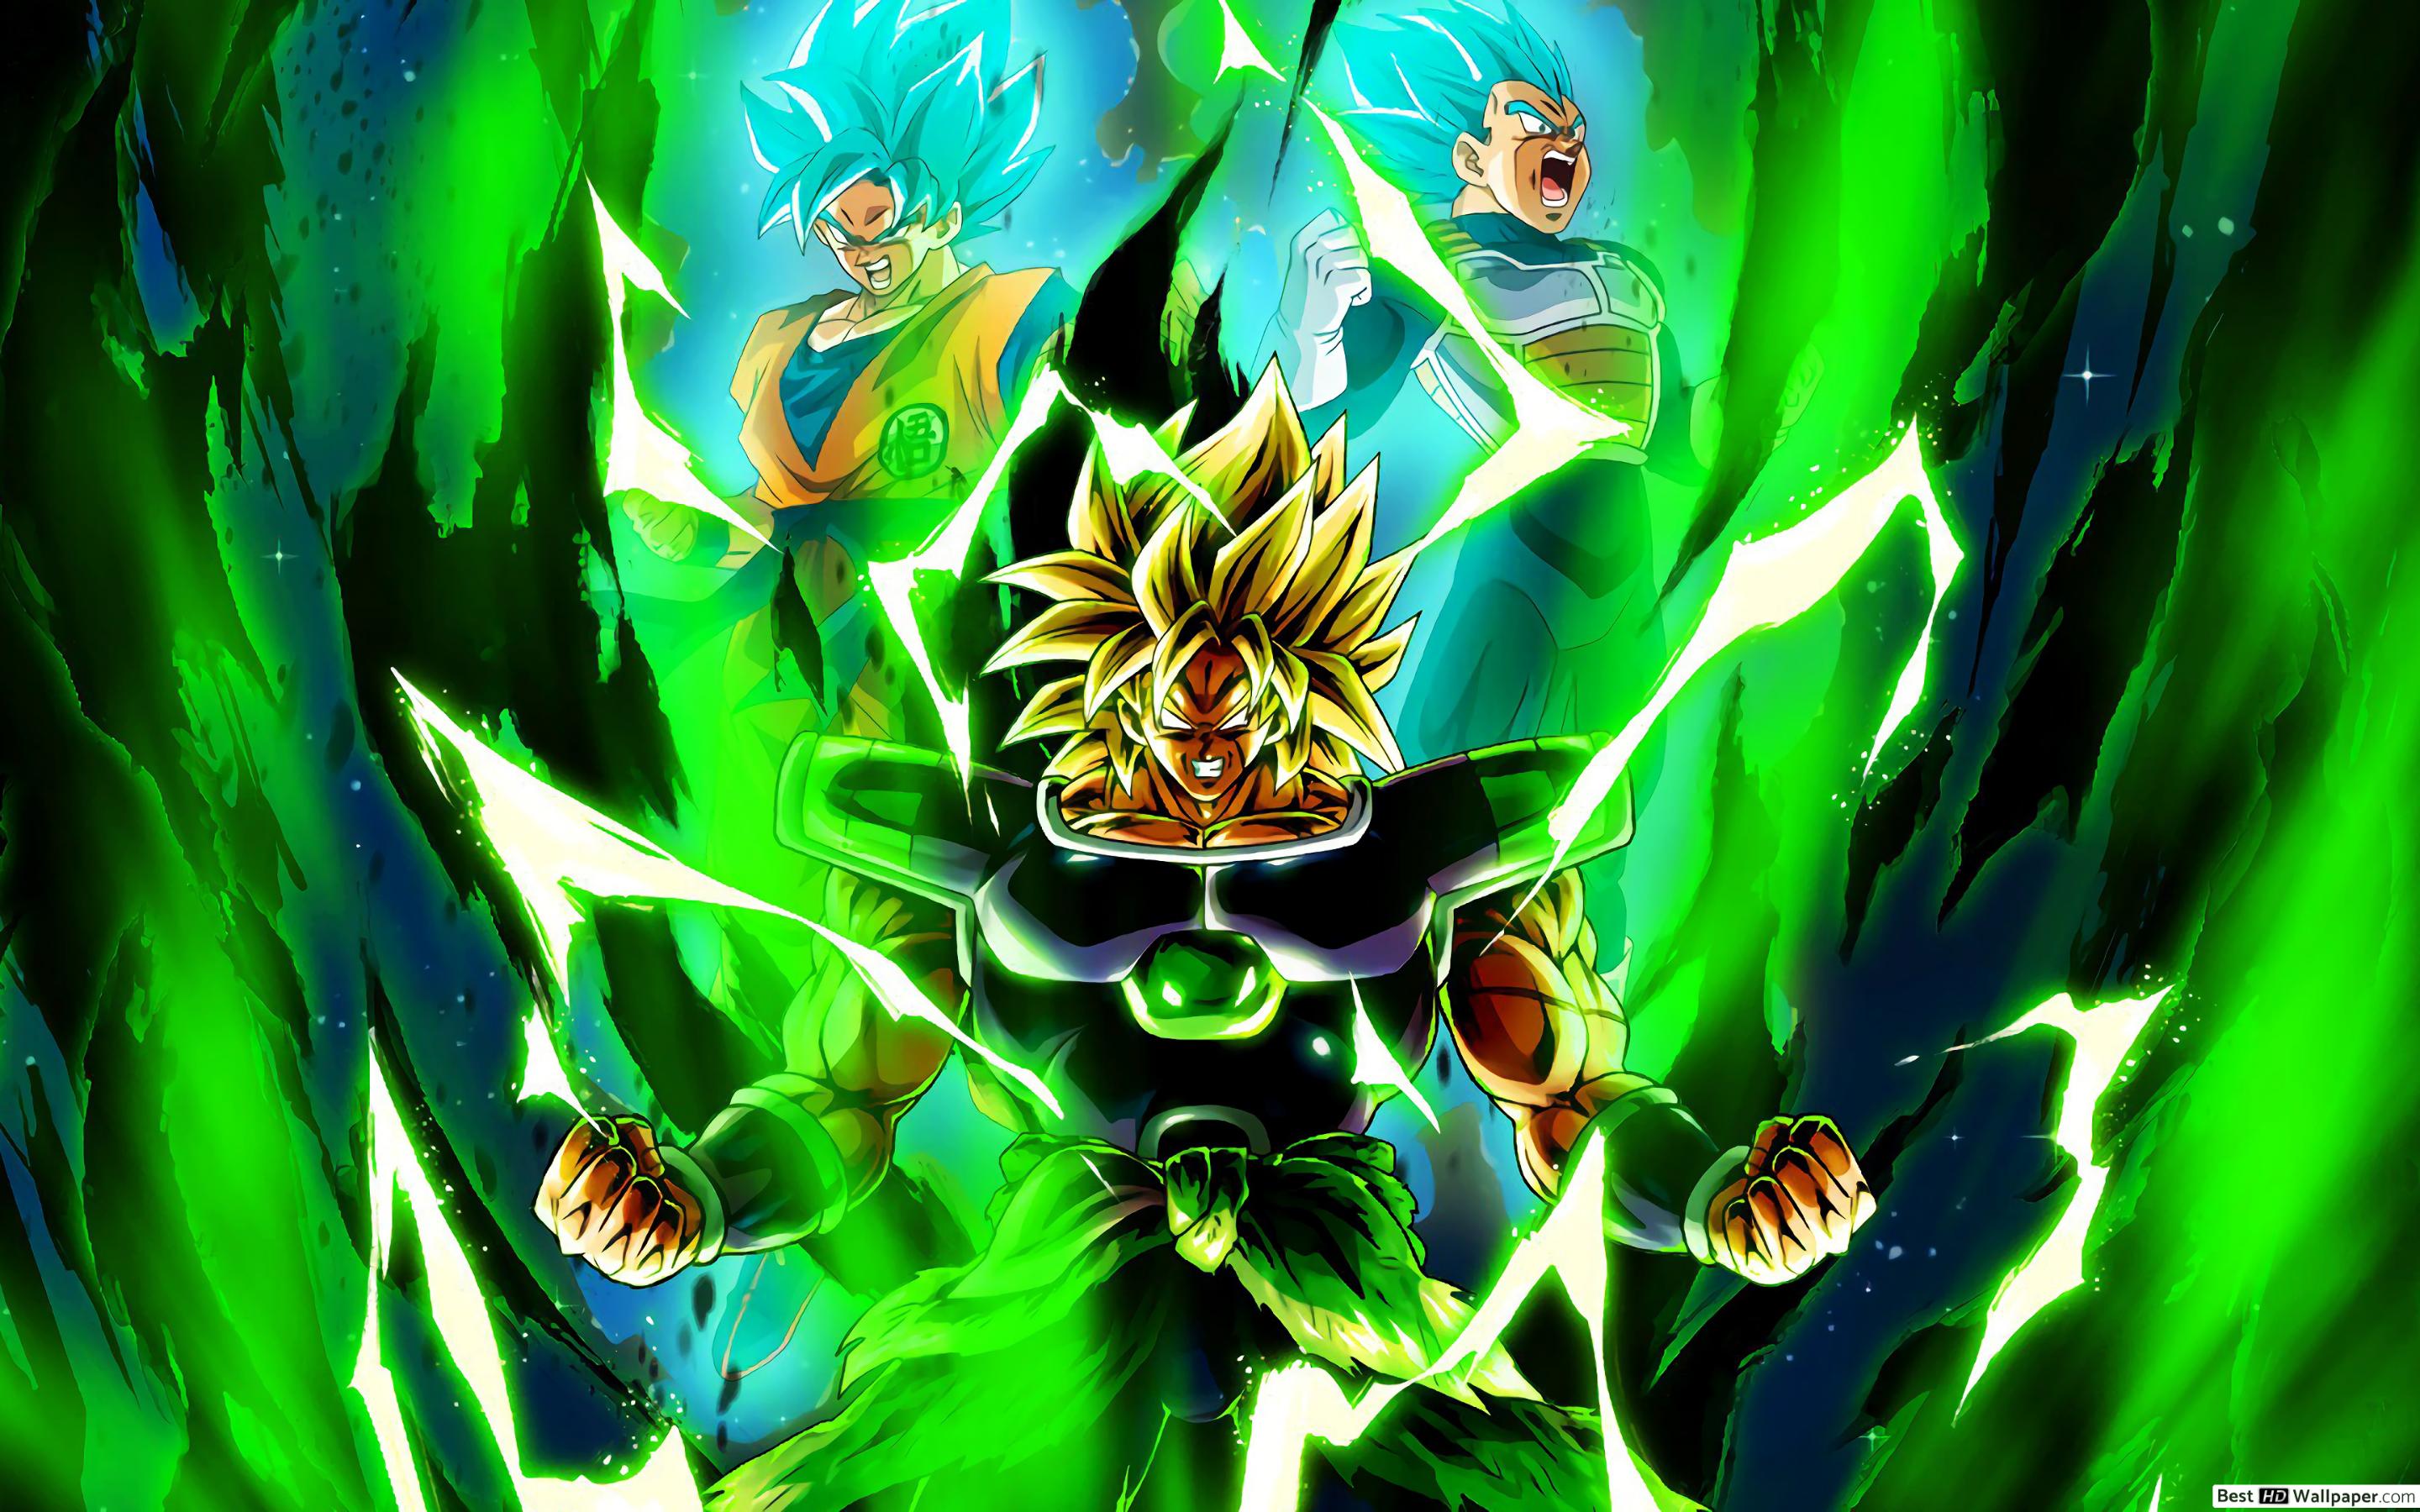 Unstoppable Broly 4K Wallpapers